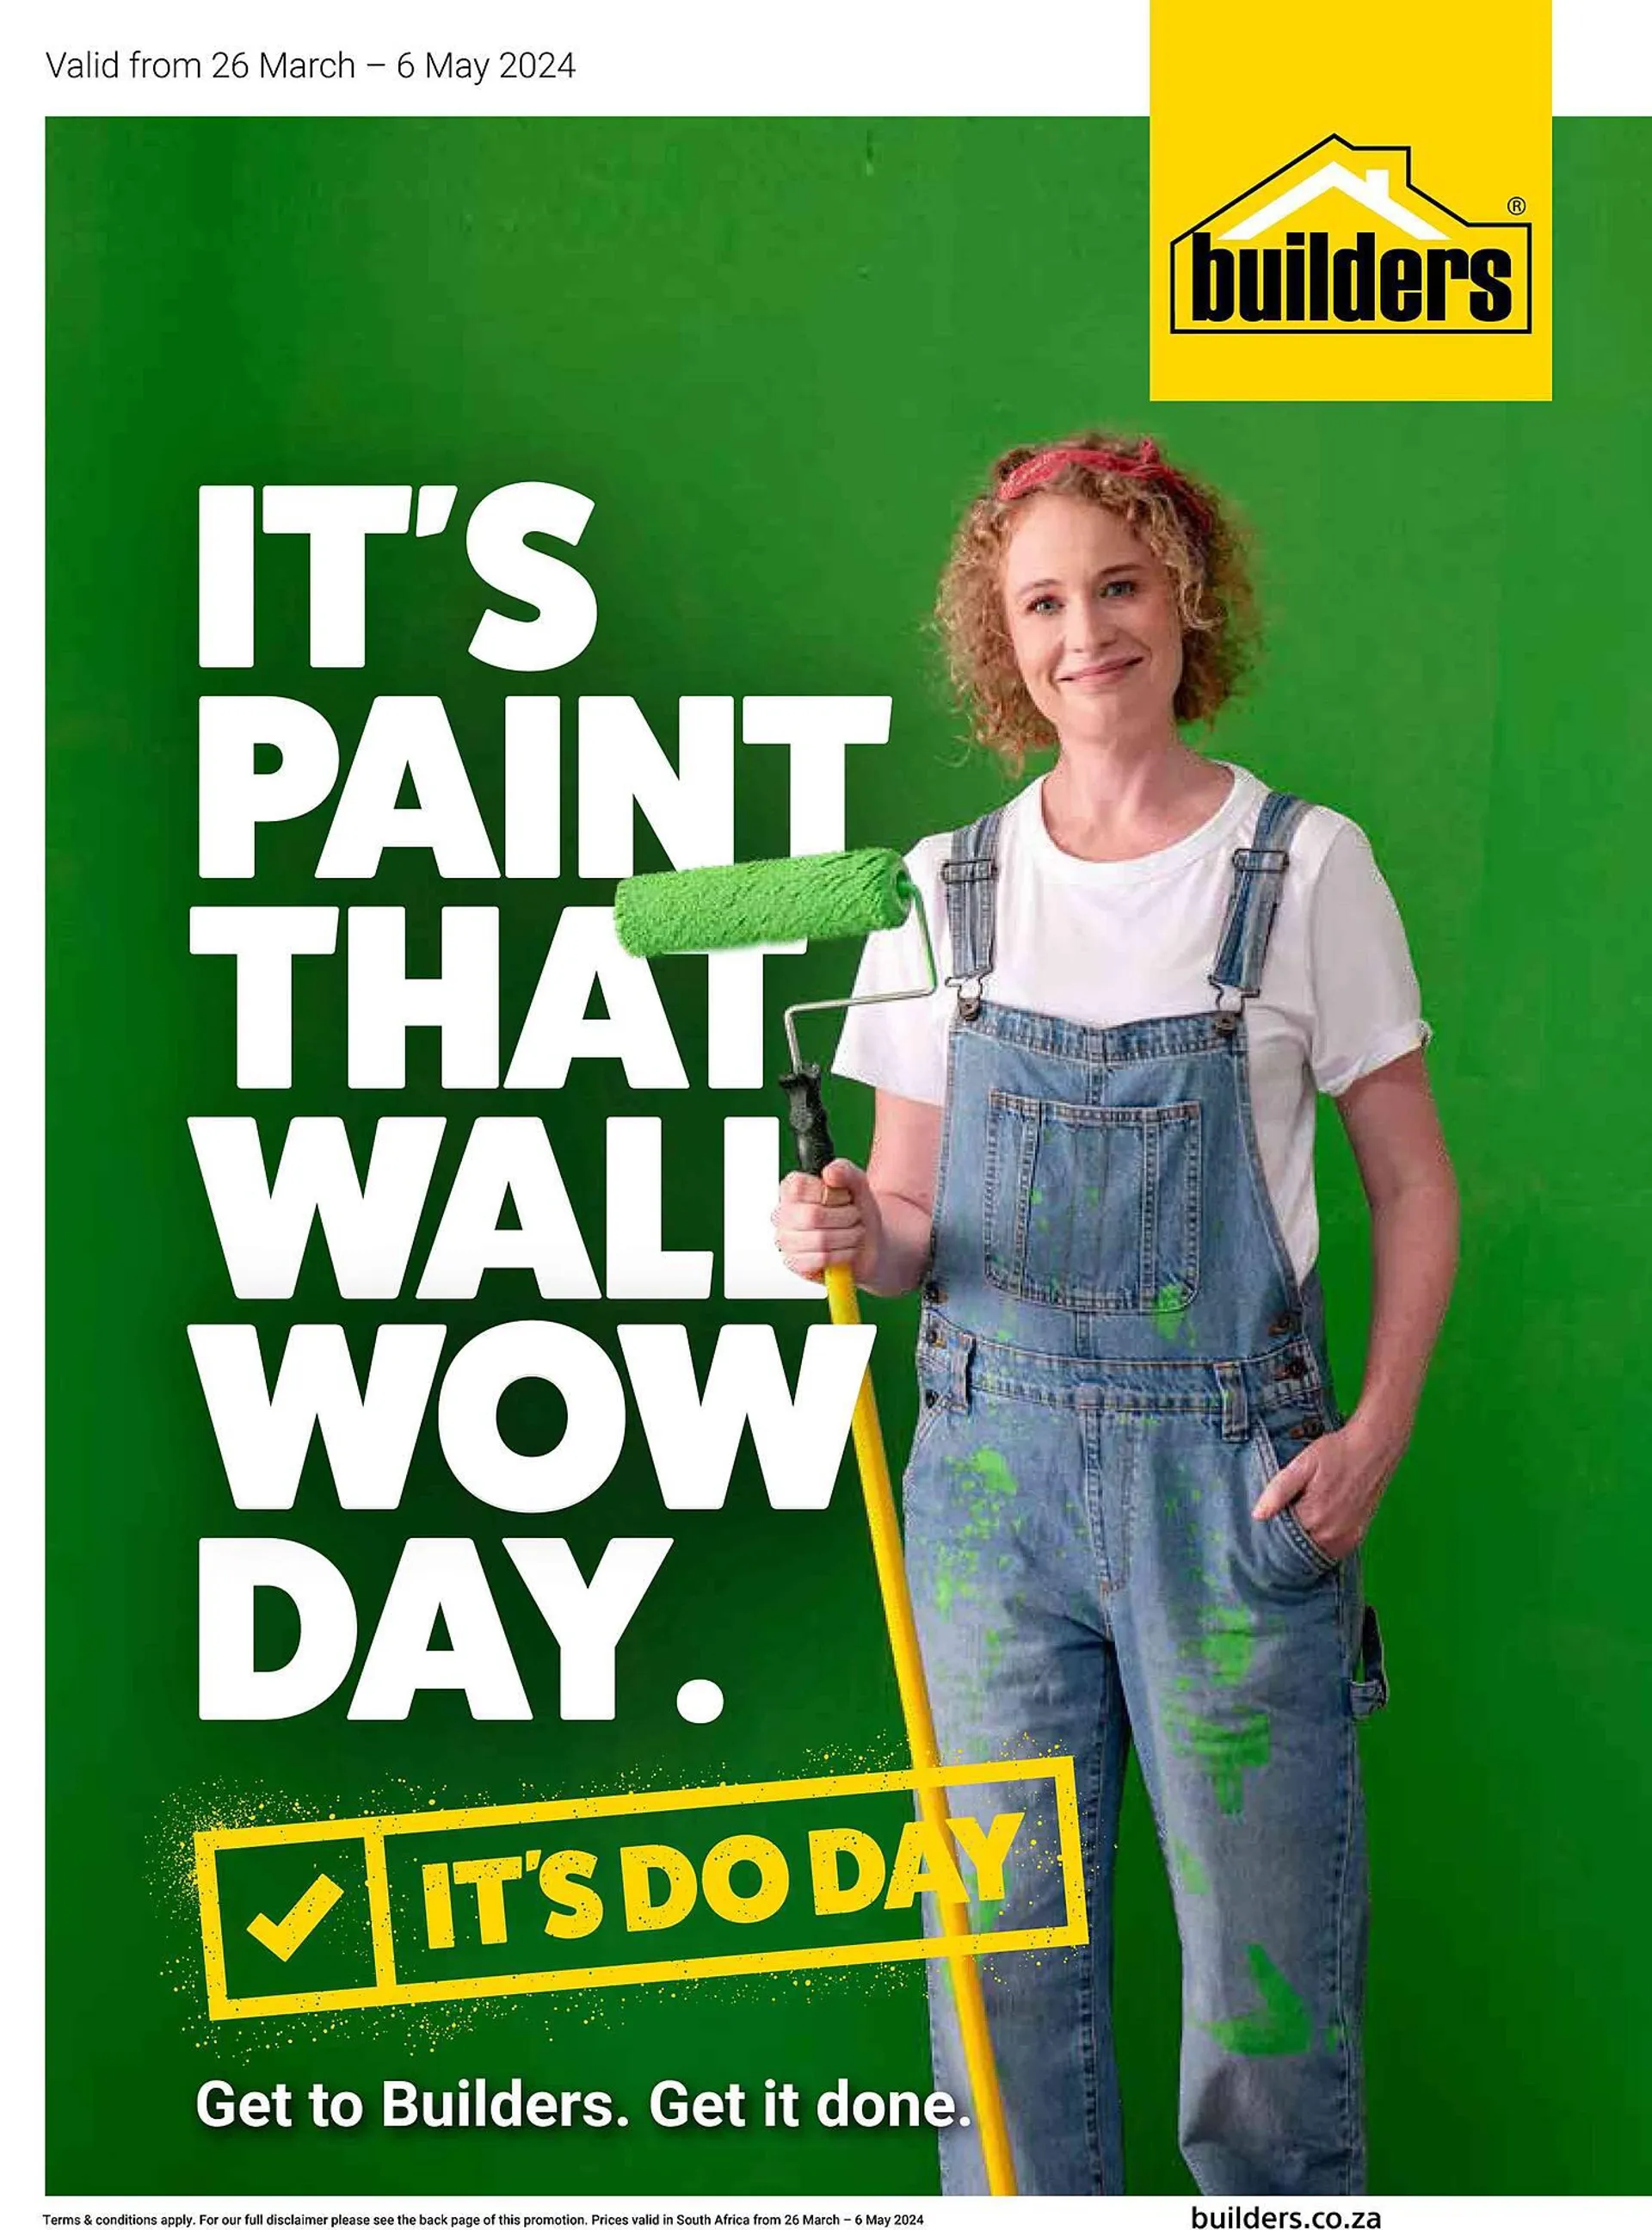 Builders Warehouse catalogue - 26 March 6 May 2024 - Page 1